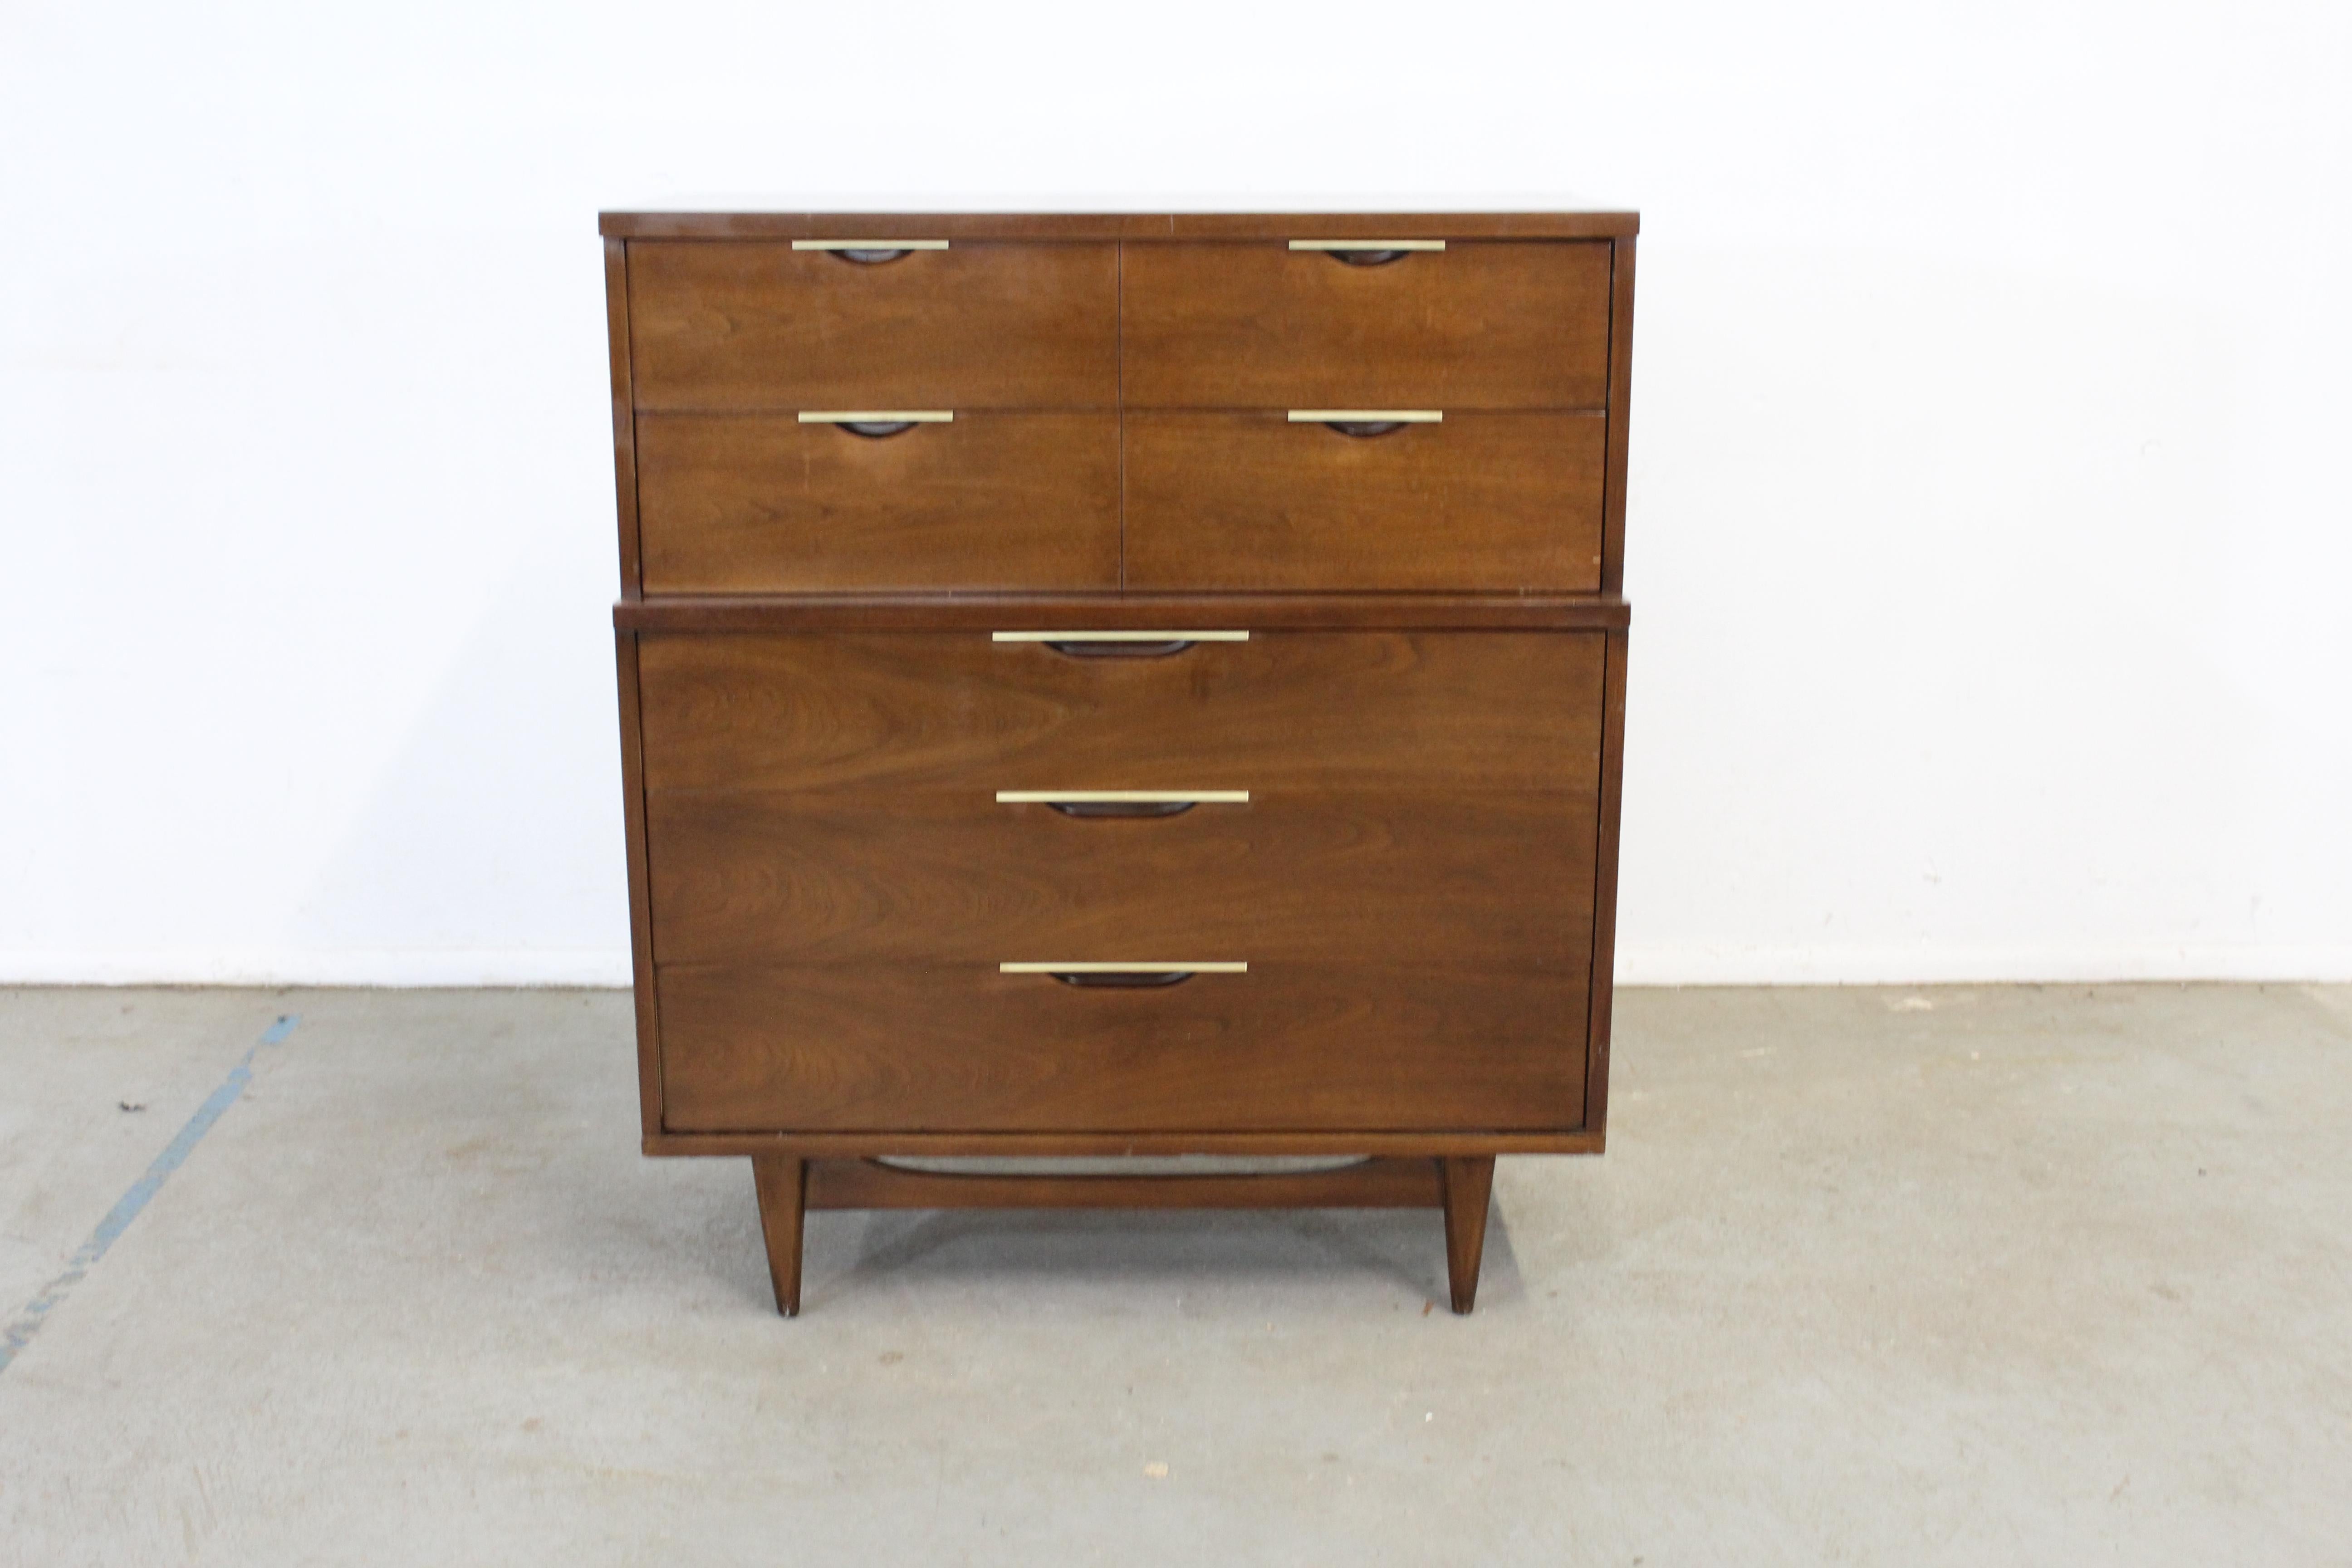 Mid-Century Modern Kent Coffey tableau walnut tall chest on stretcher base

Offered is a beautiful Mid-Century Modern Kent Coffey tableau walnut tall chest on stretcher base. It has an spectacular stretcher base. This model has a laminate faux